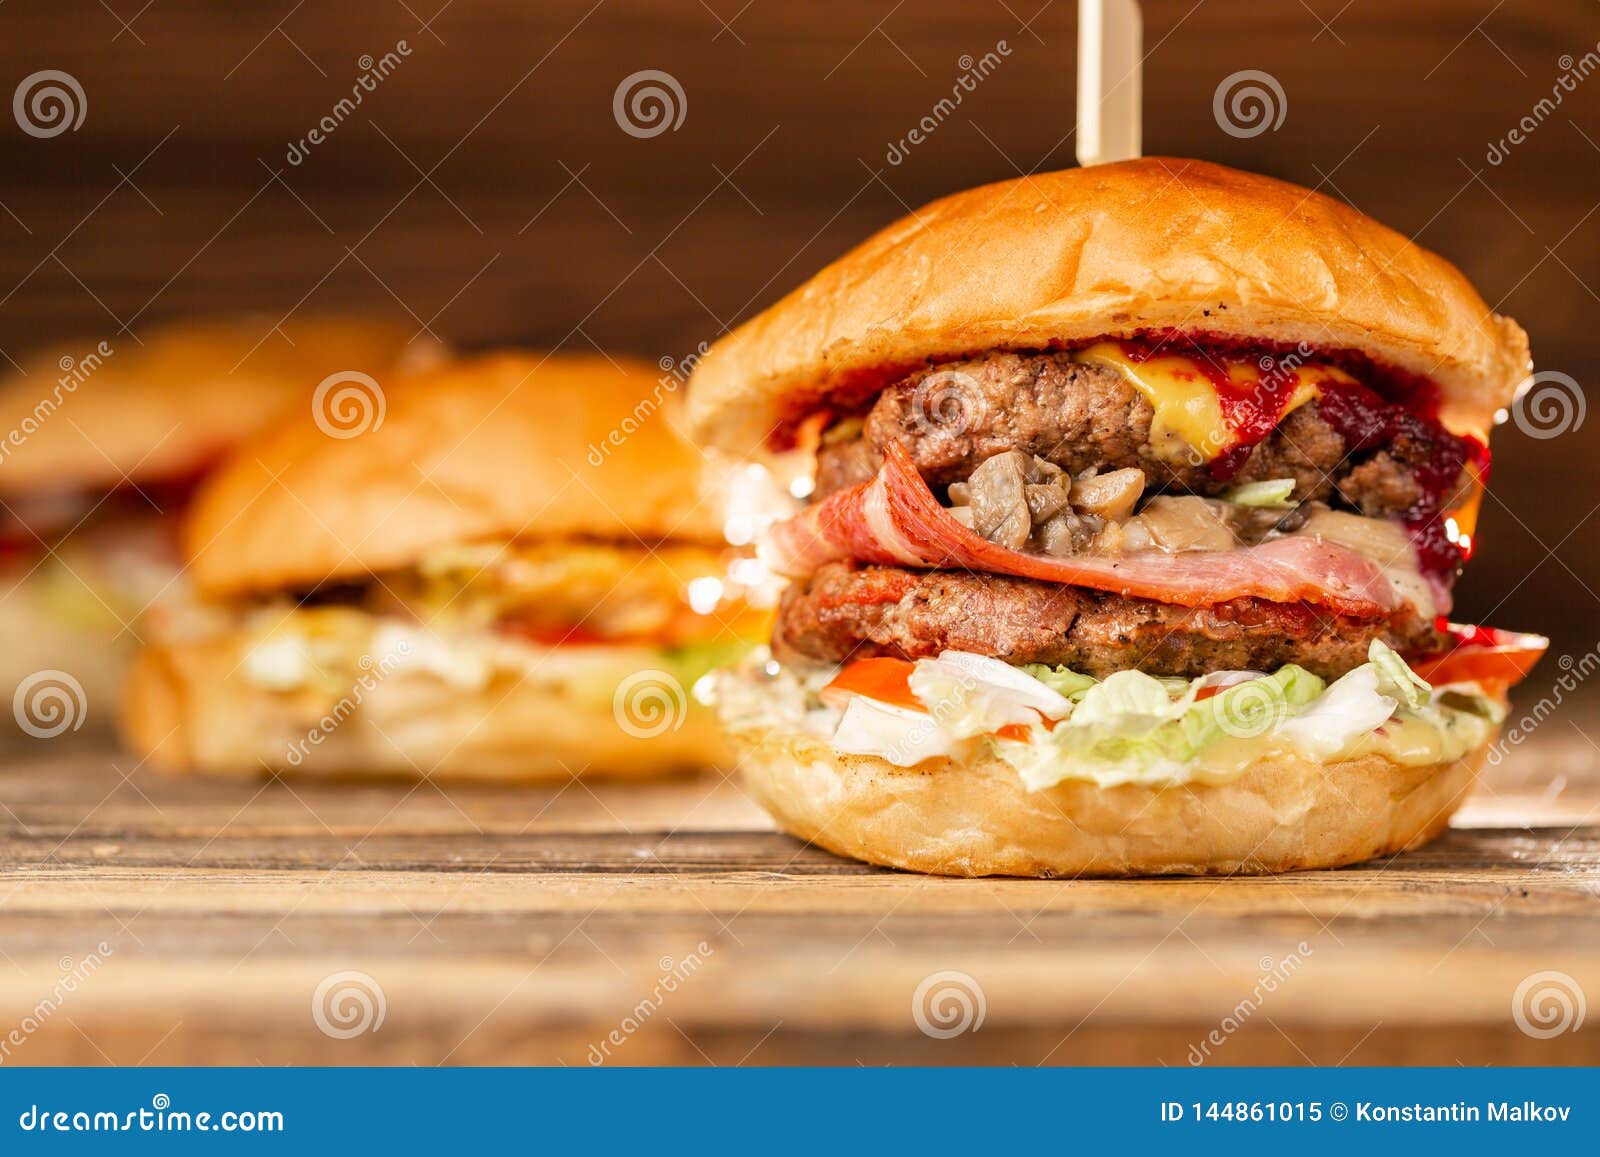 three big burger with meat cooked on bbq coal. lunch on a wooden background. the concept of fast food and unhealthy food